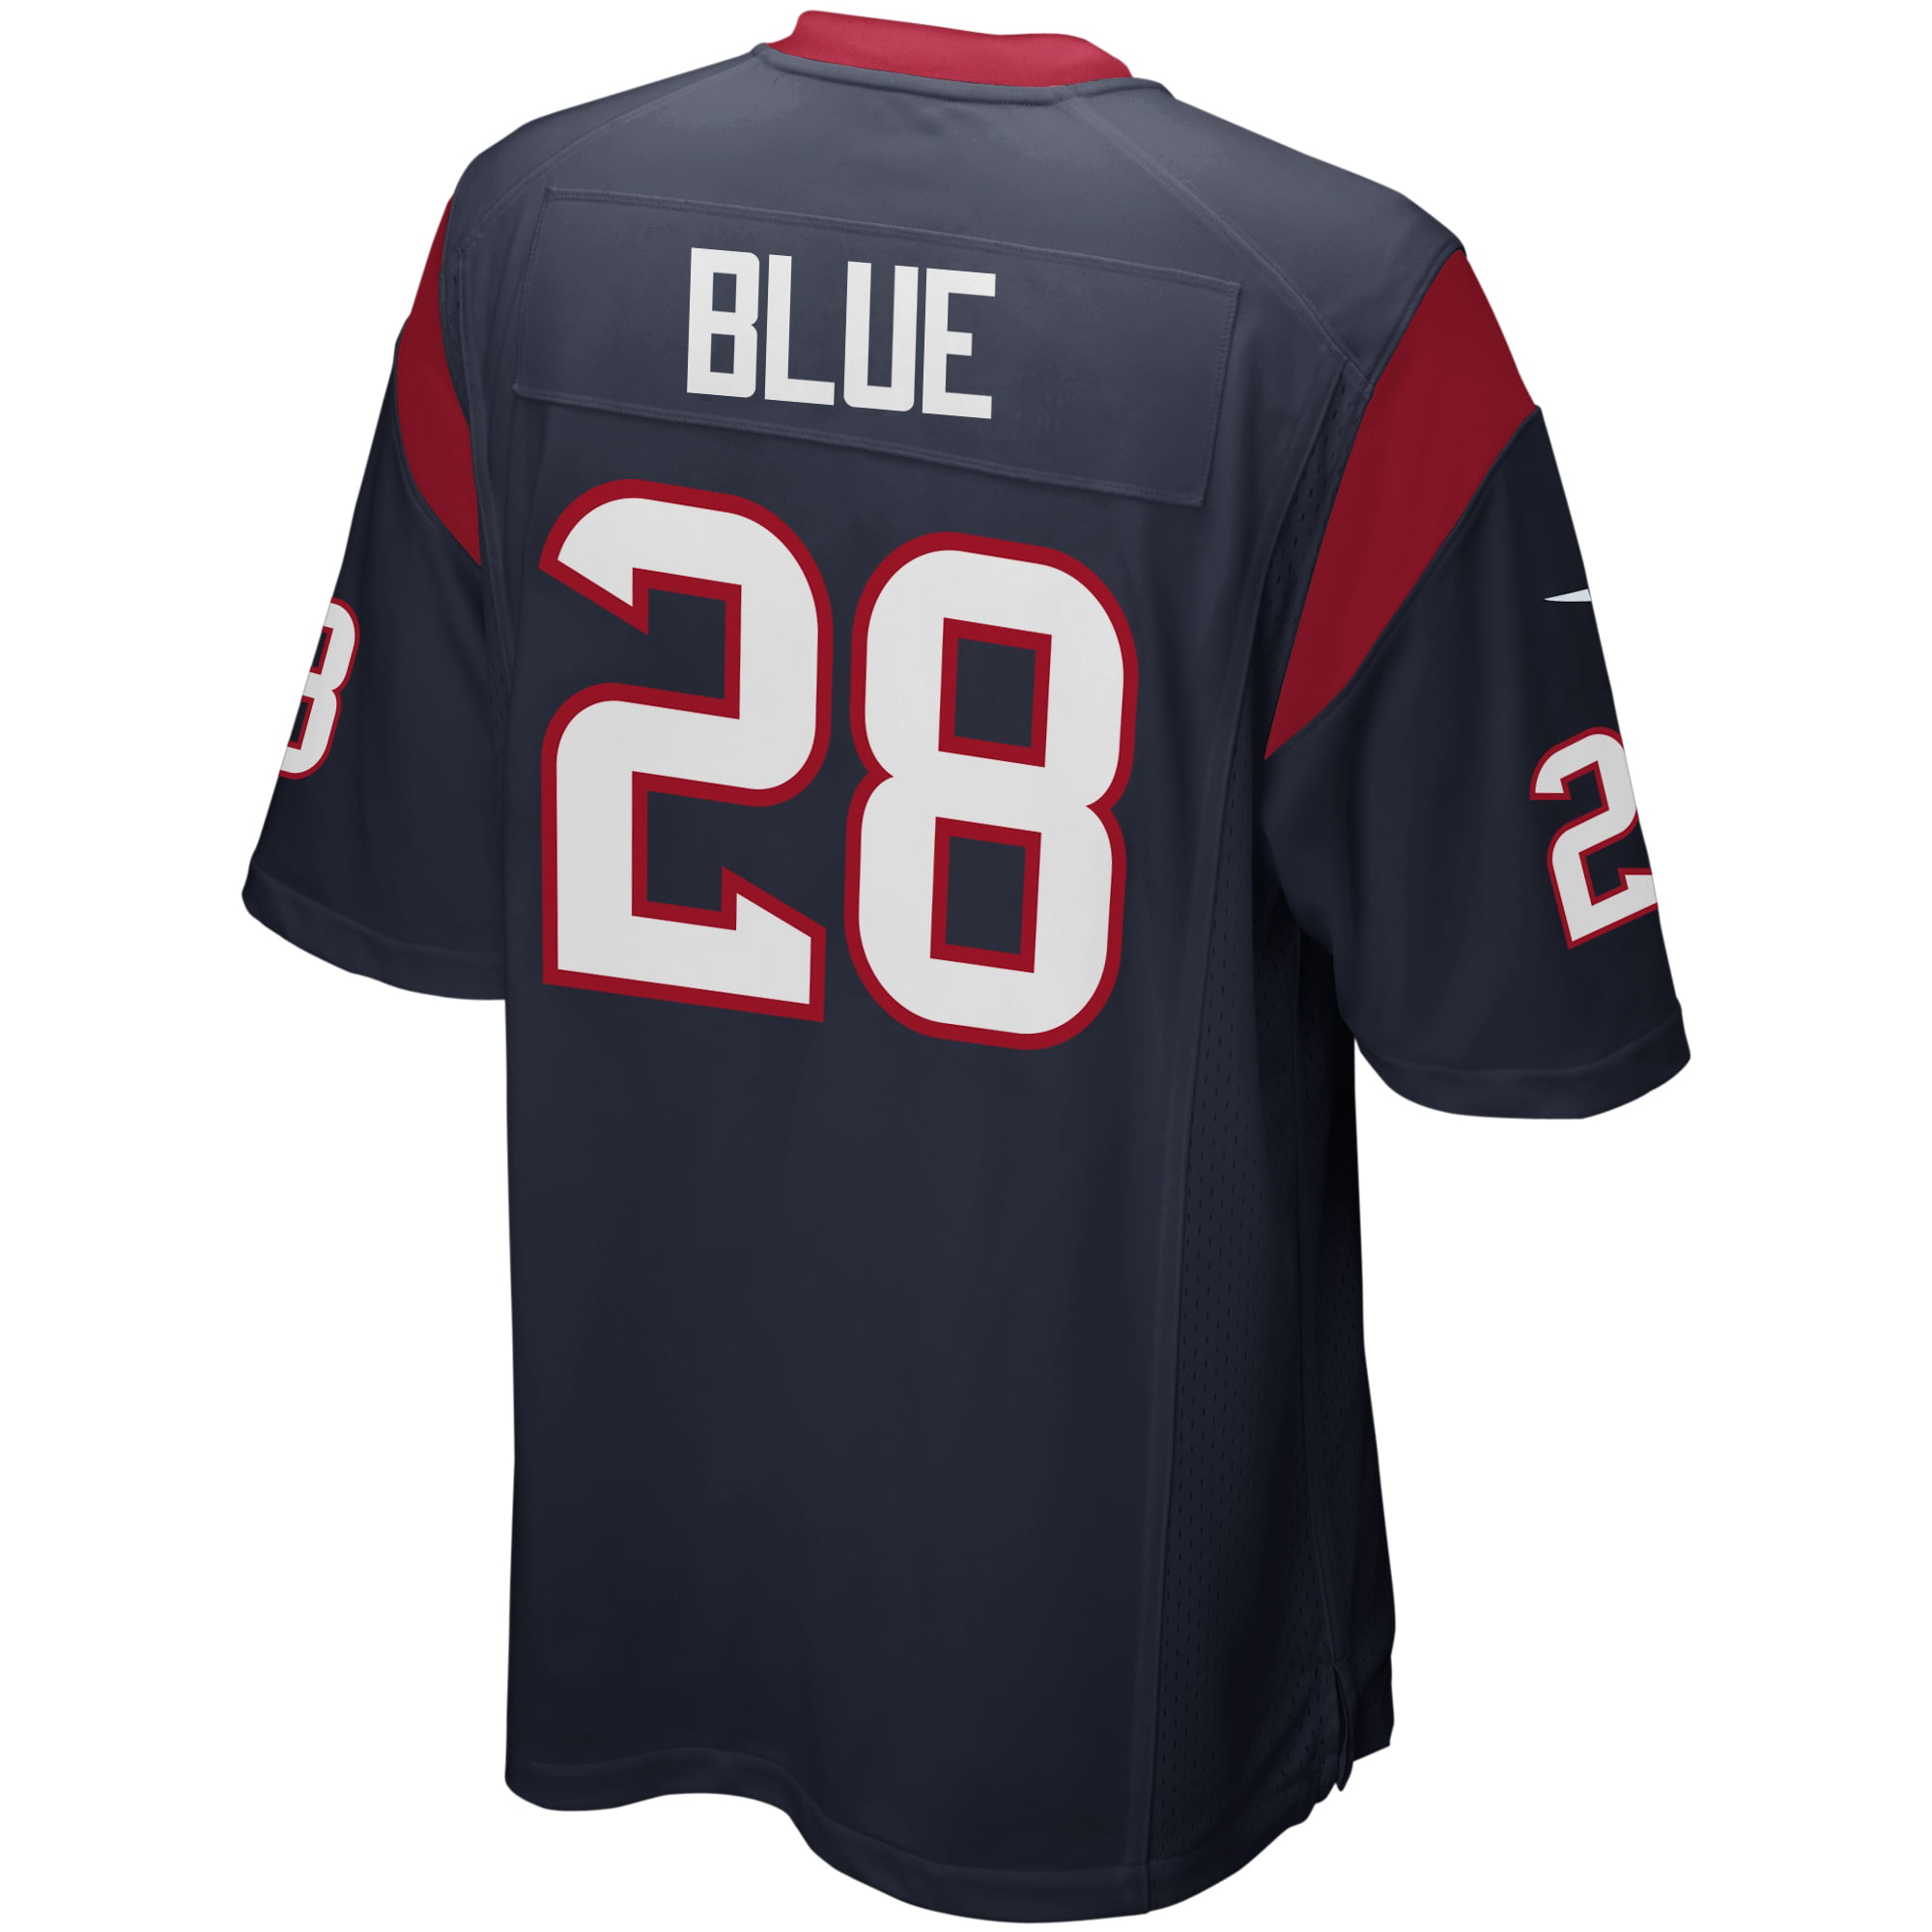 alfred blue texans jersey